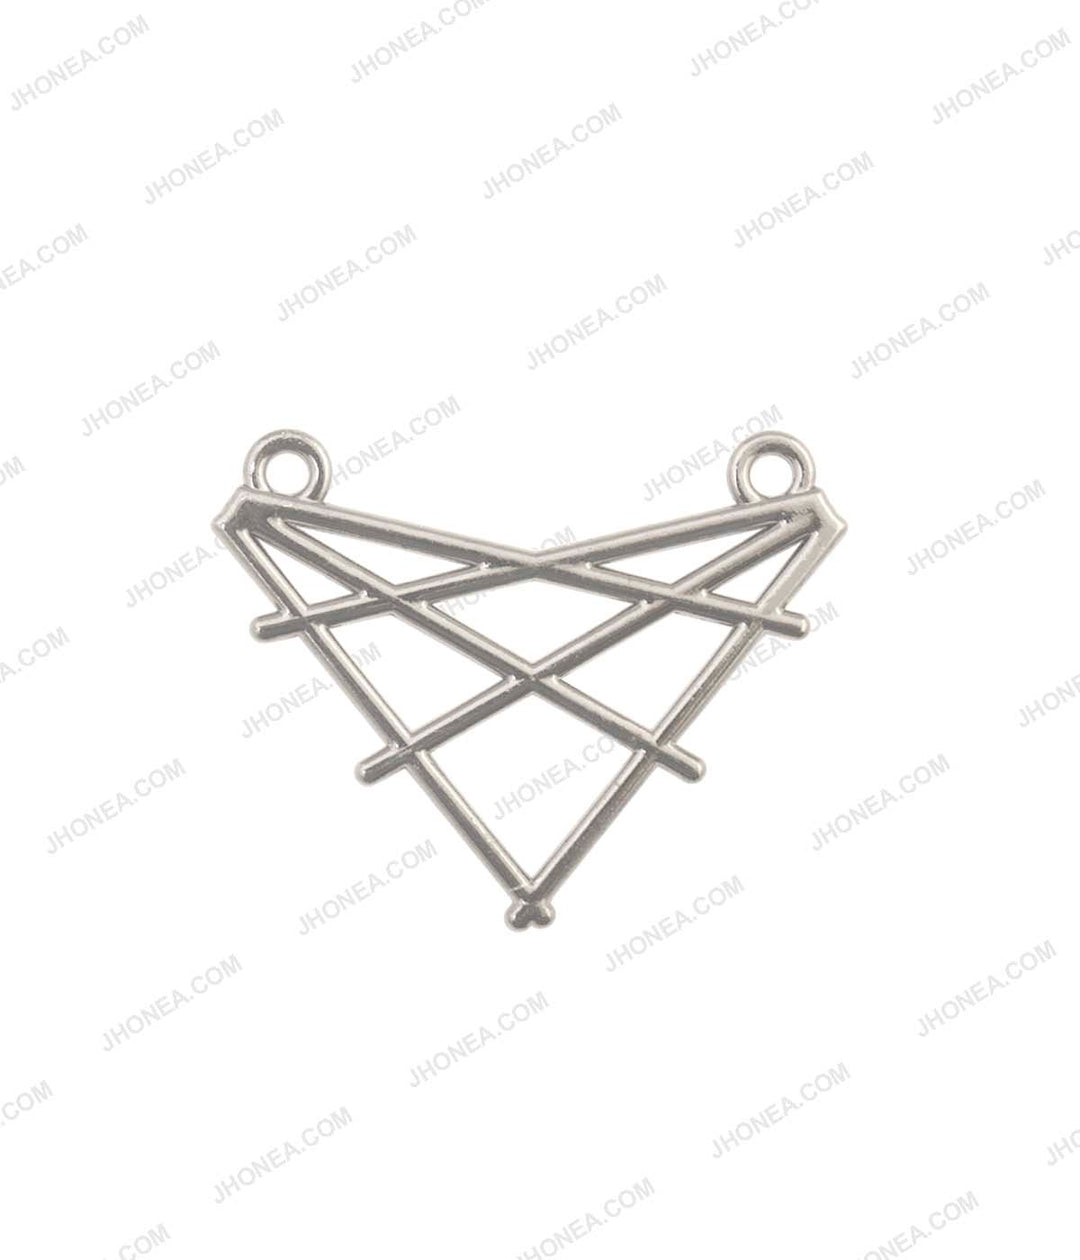 Geometric Criss-Cross Pattern Statement Clothing Accessory in Silver Color